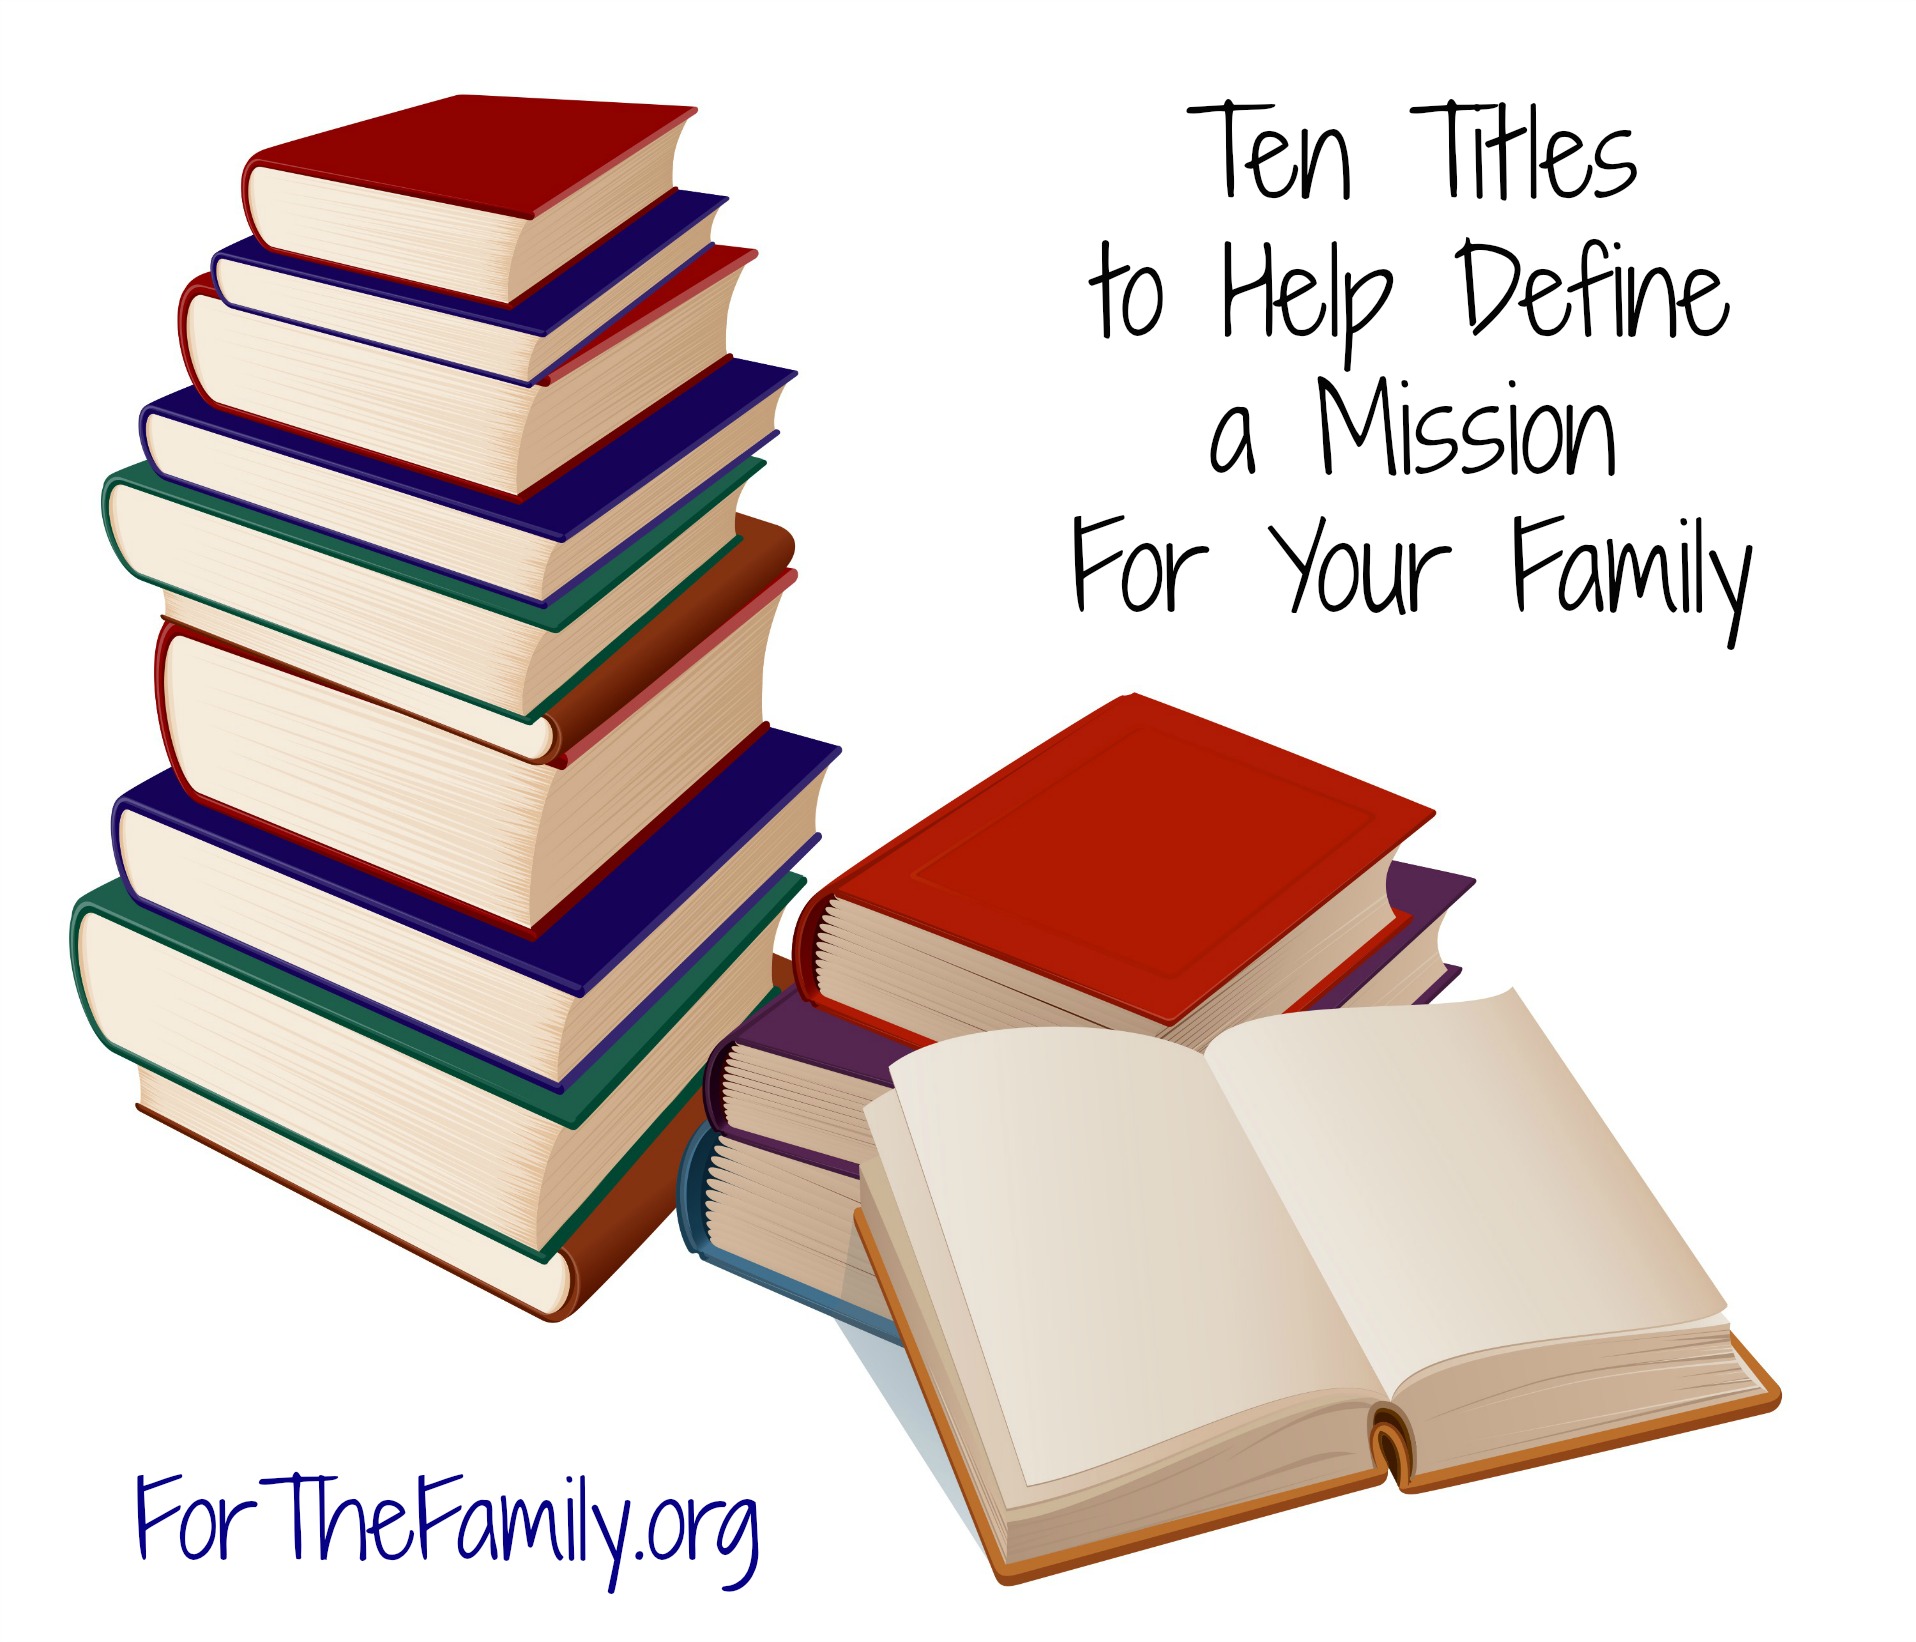 Ten Titles to Help Define a Mission for Your Family